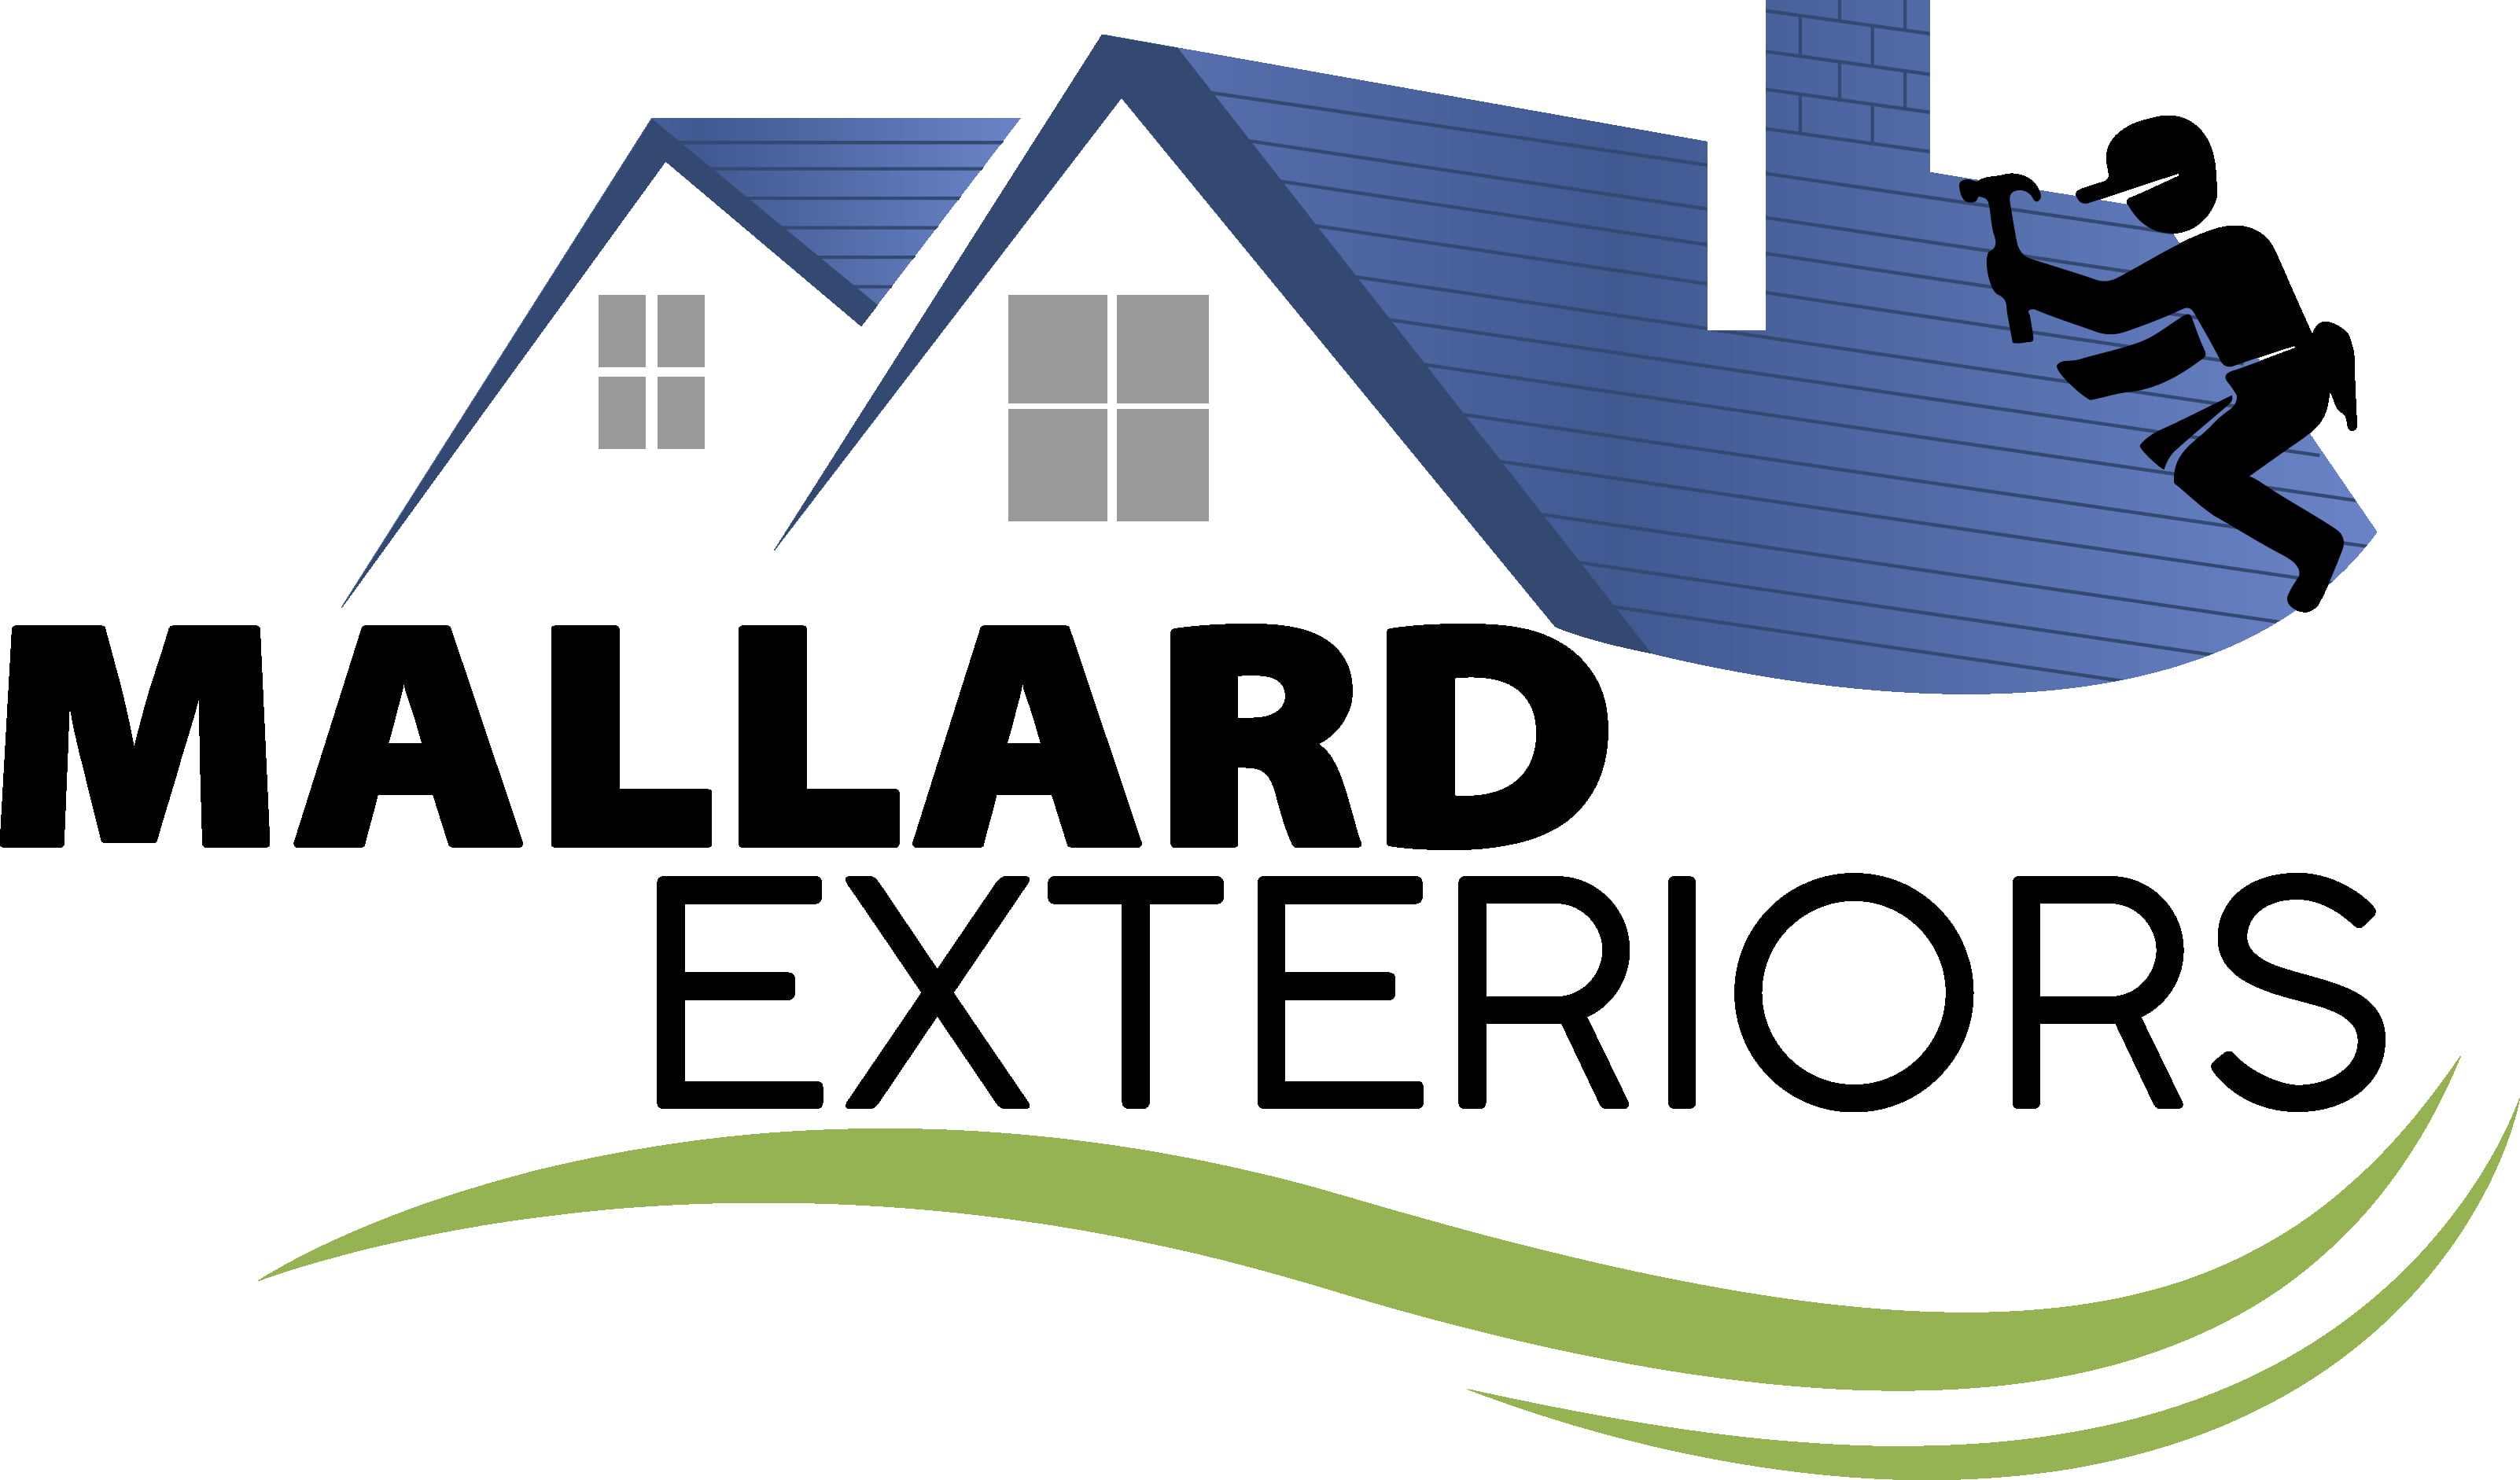 Mallard Exteriors roofing company in Maryland